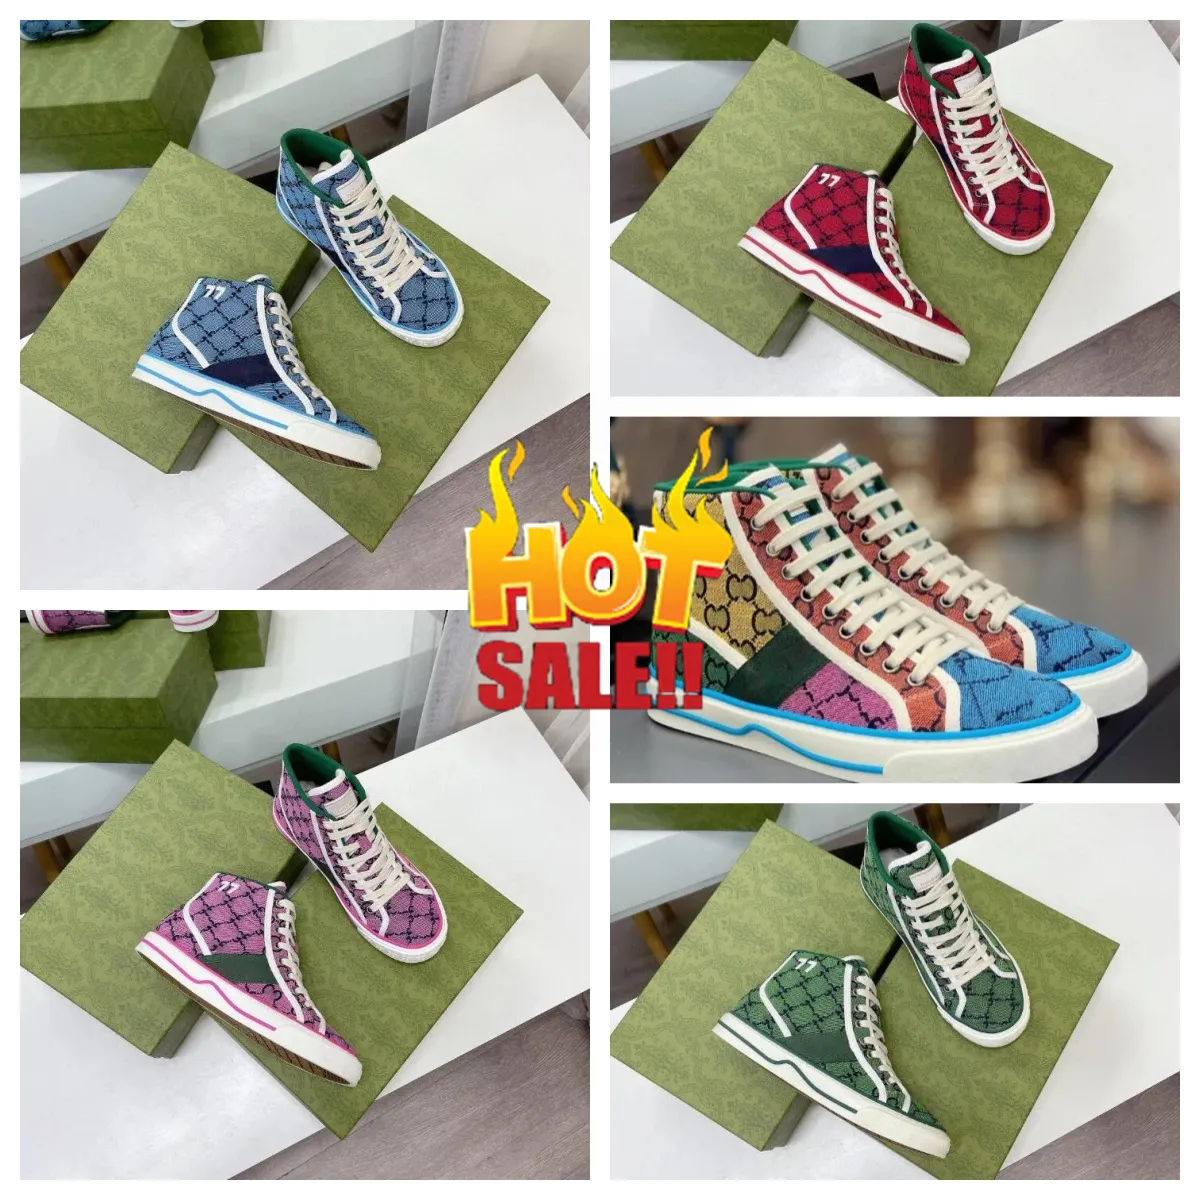 2024 New Top Luxury Tennis 1977 Canvas Casual shoes Designer Women Shoe Italy Green And Red Blue Web Stripe Rubber Sole for Stretch Cotton Low platform Top Men Sneaker